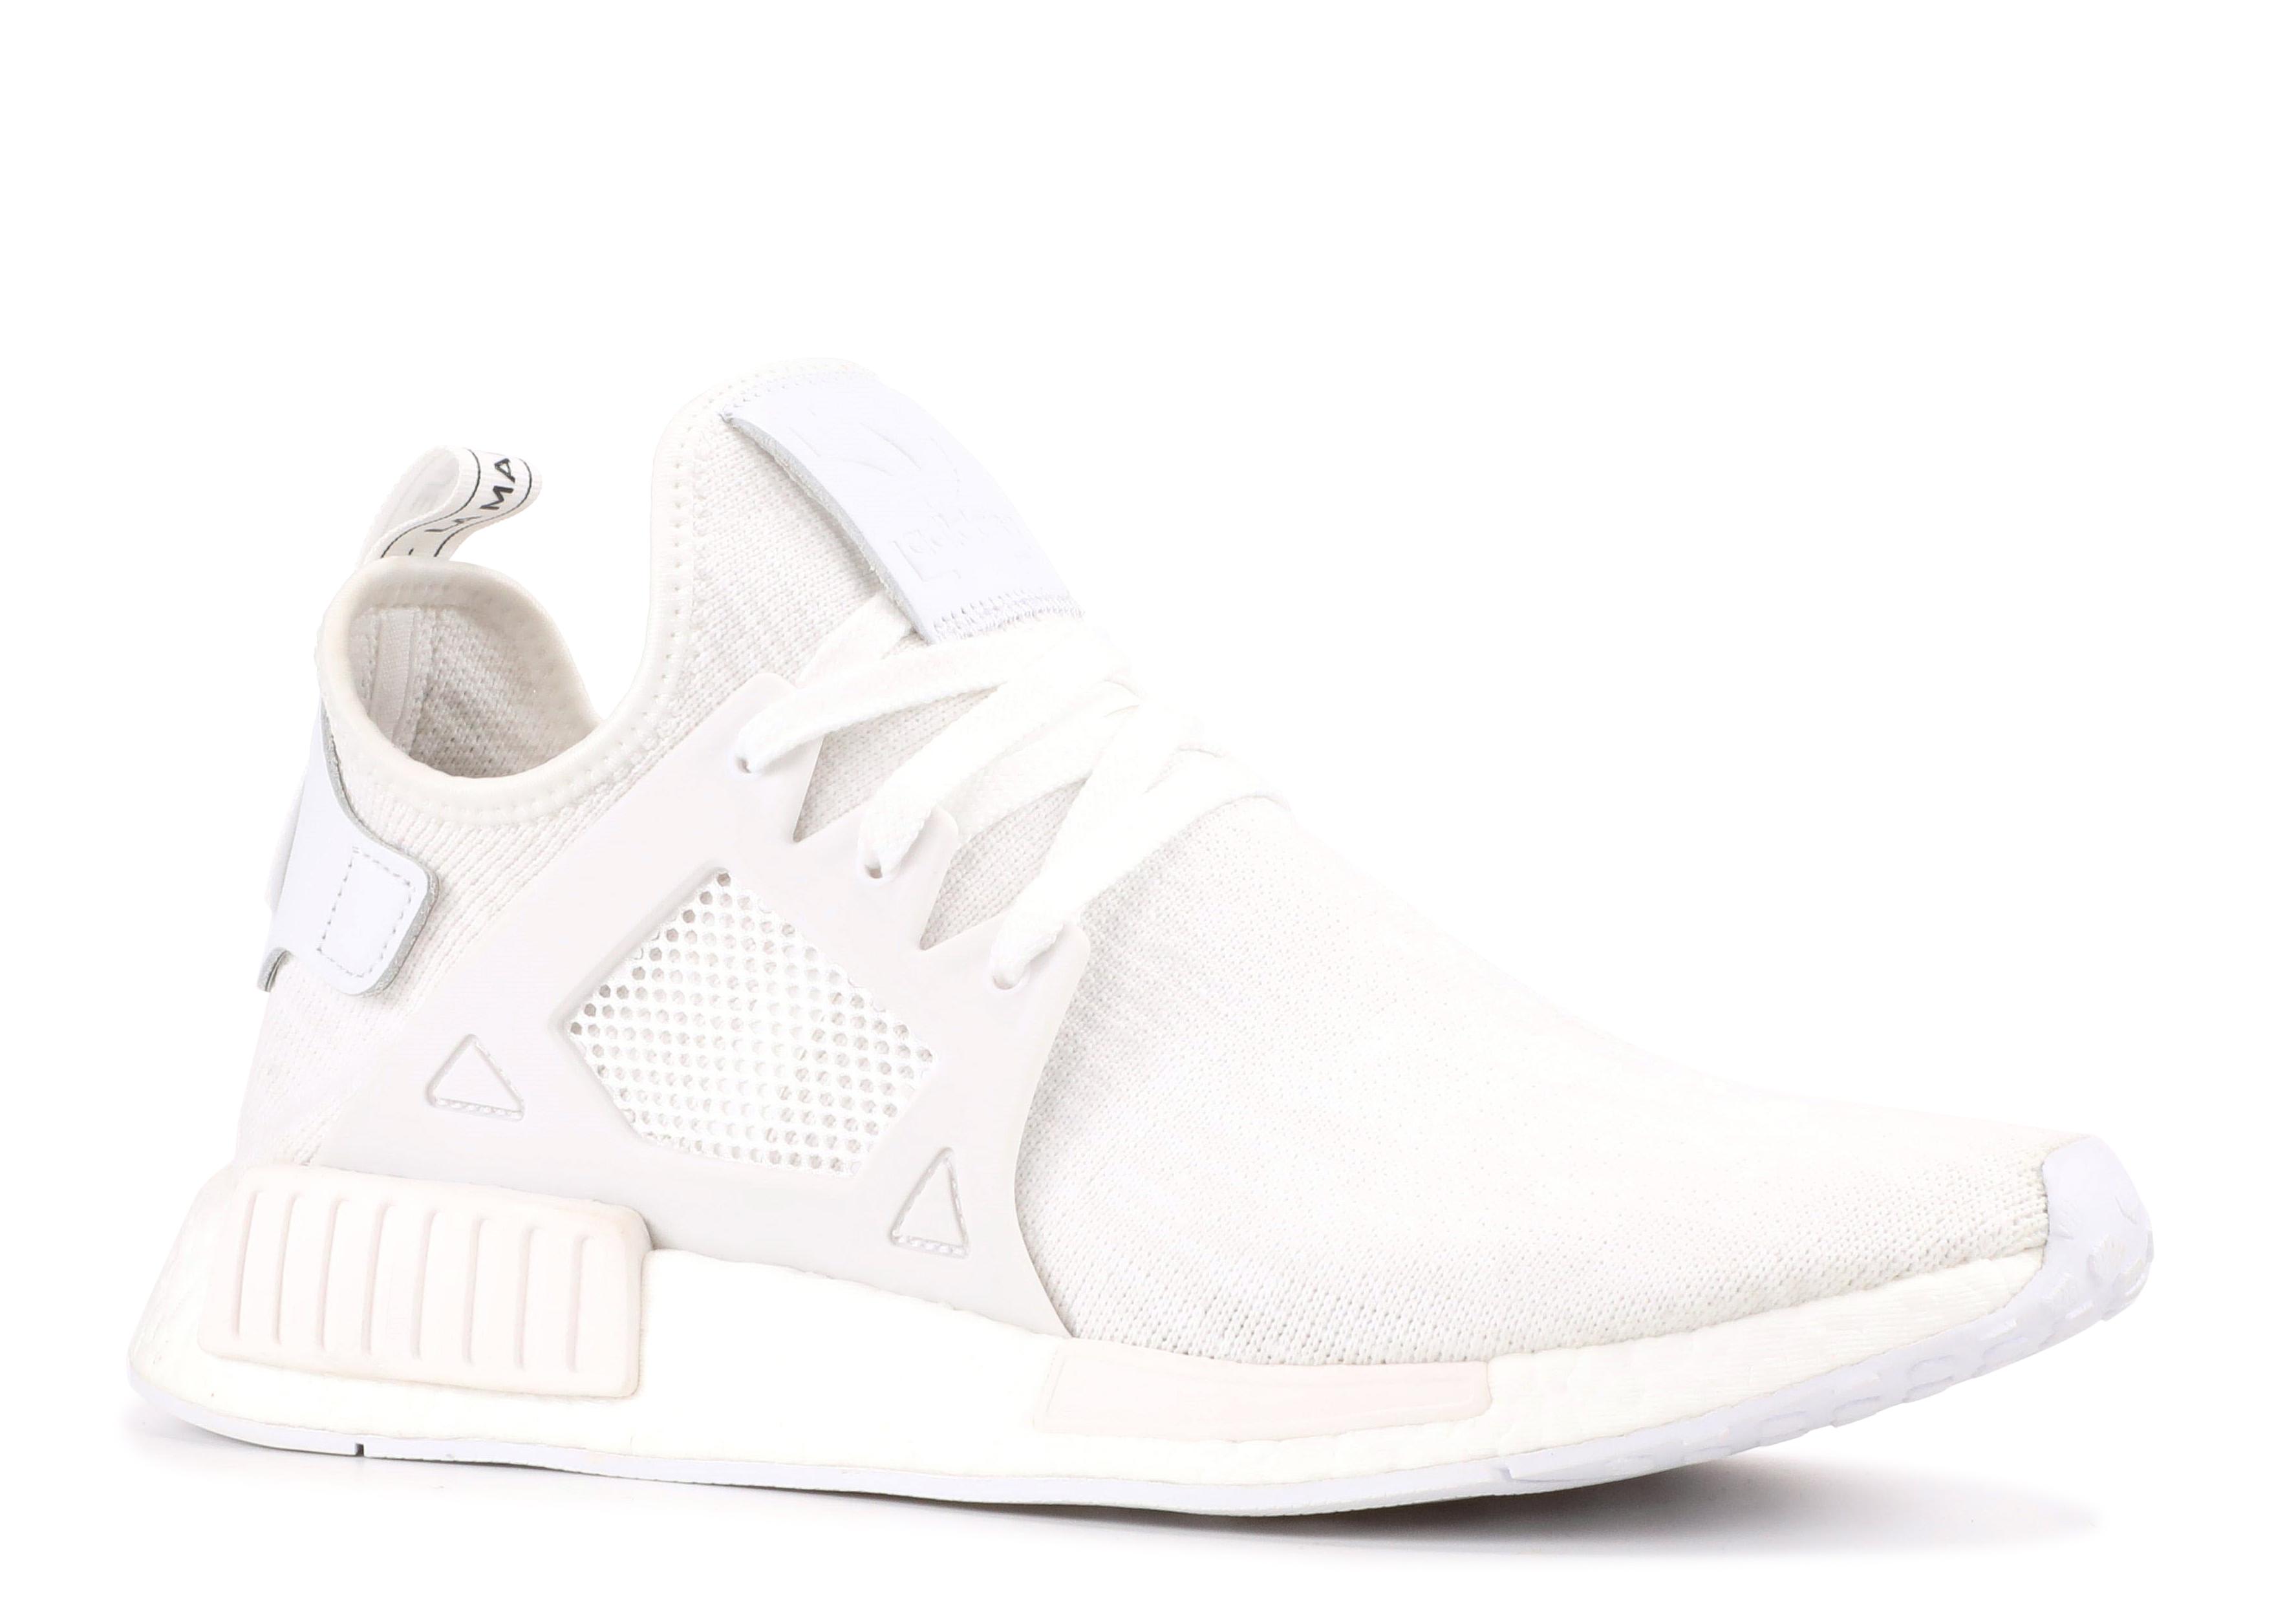 Adidas Nmd Xr1 Shoes Size 4.in Beige White Black Whit.